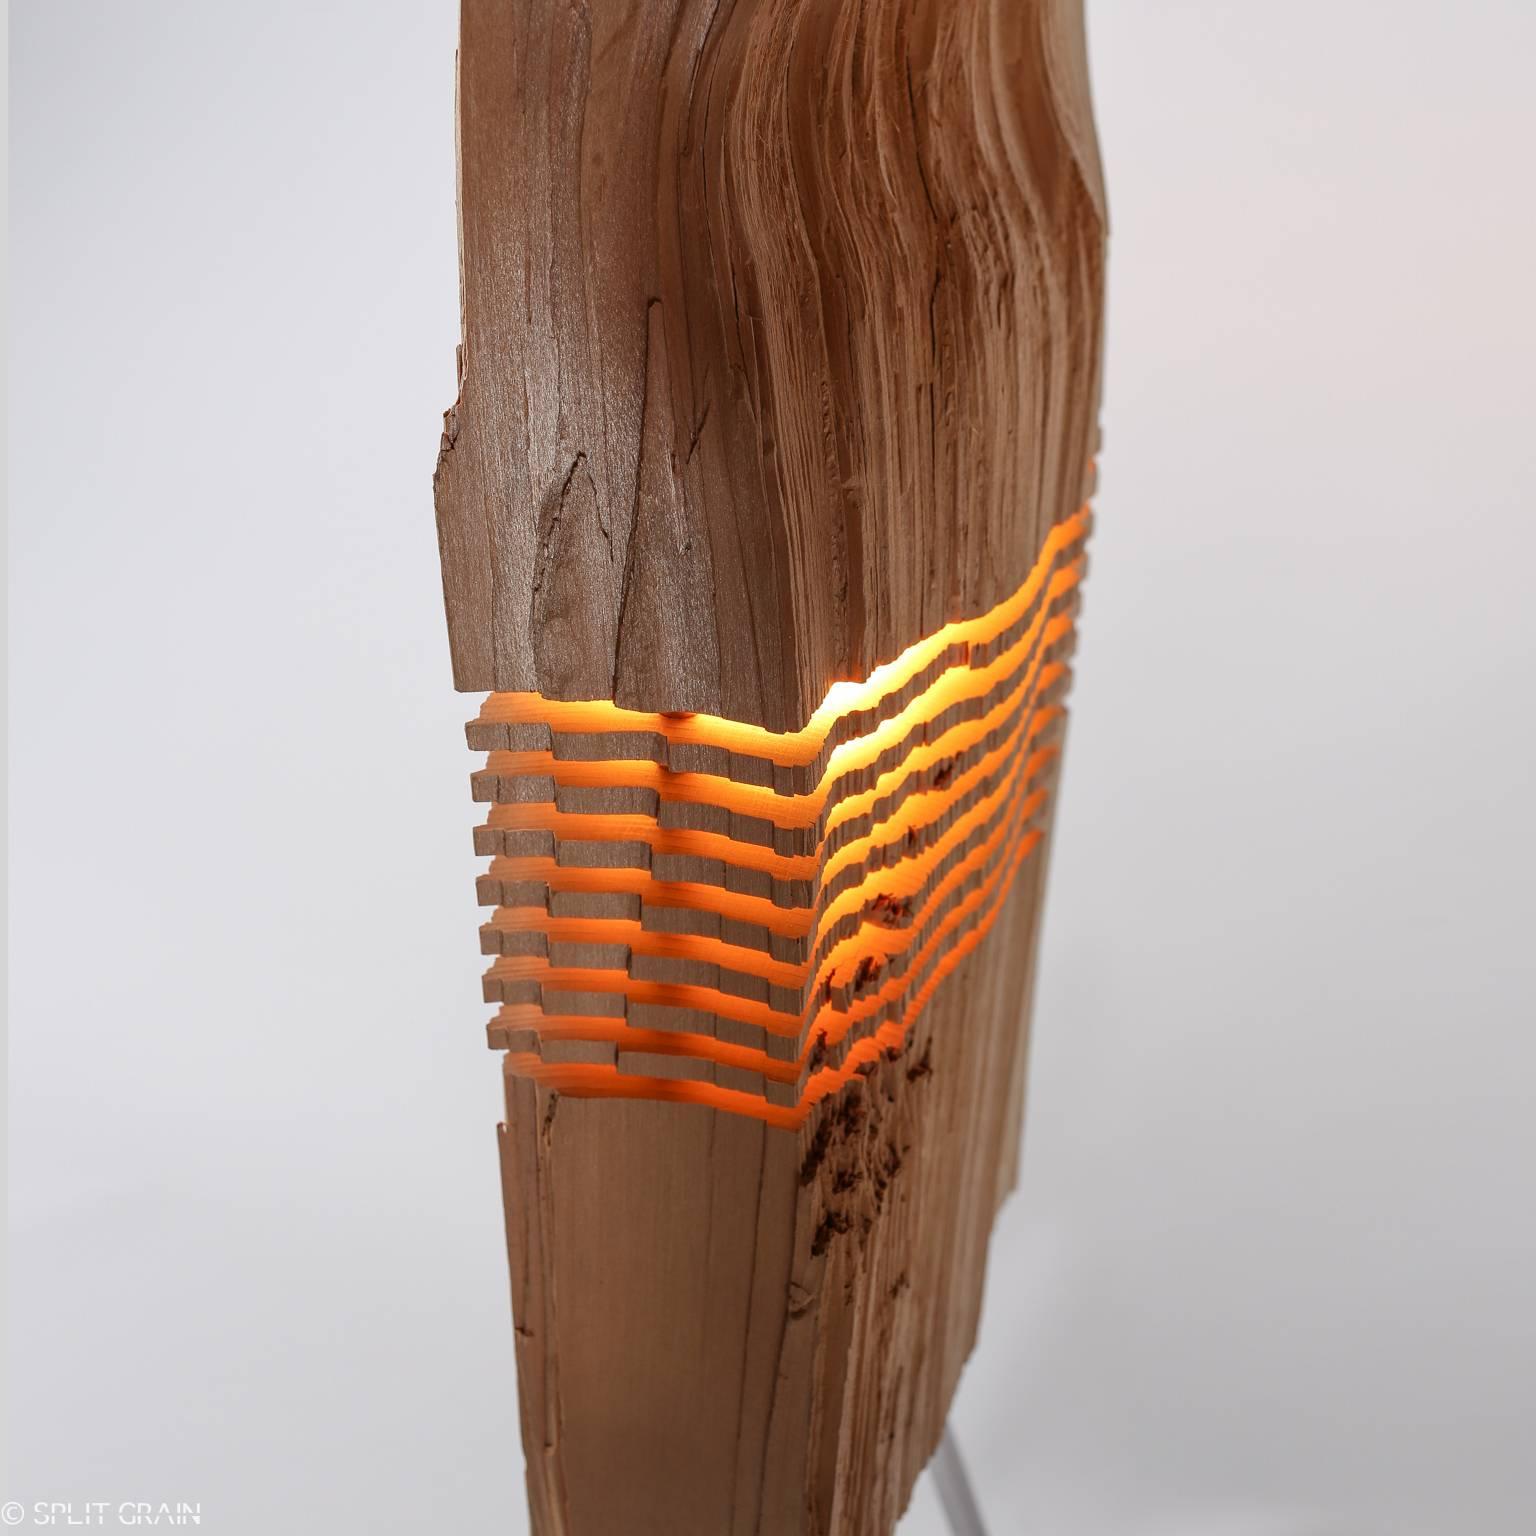 One of a kind split grain light sculpture is made by 20th century artist Paul Foeckler from a reclaimed California Incense Cedar with a hollowed core that is illuminated with a built-in dimmable LED bulb and suspended on an aluminum armature.
    